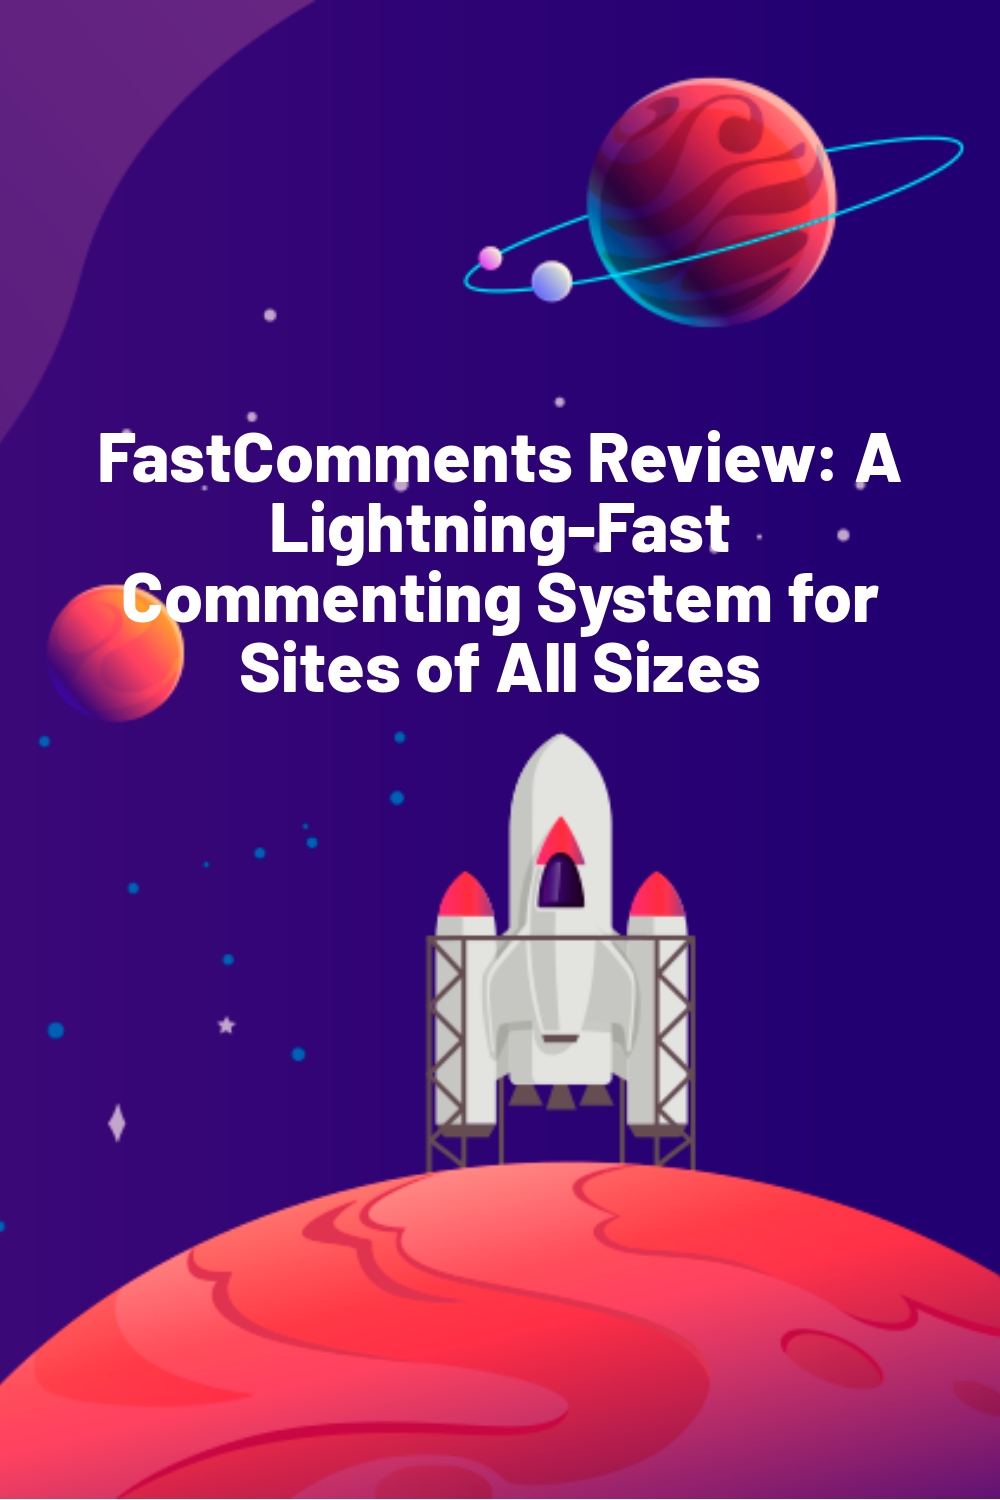 FastComments Review: A Lightning-Fast Commenting System for Sites of All Sizes